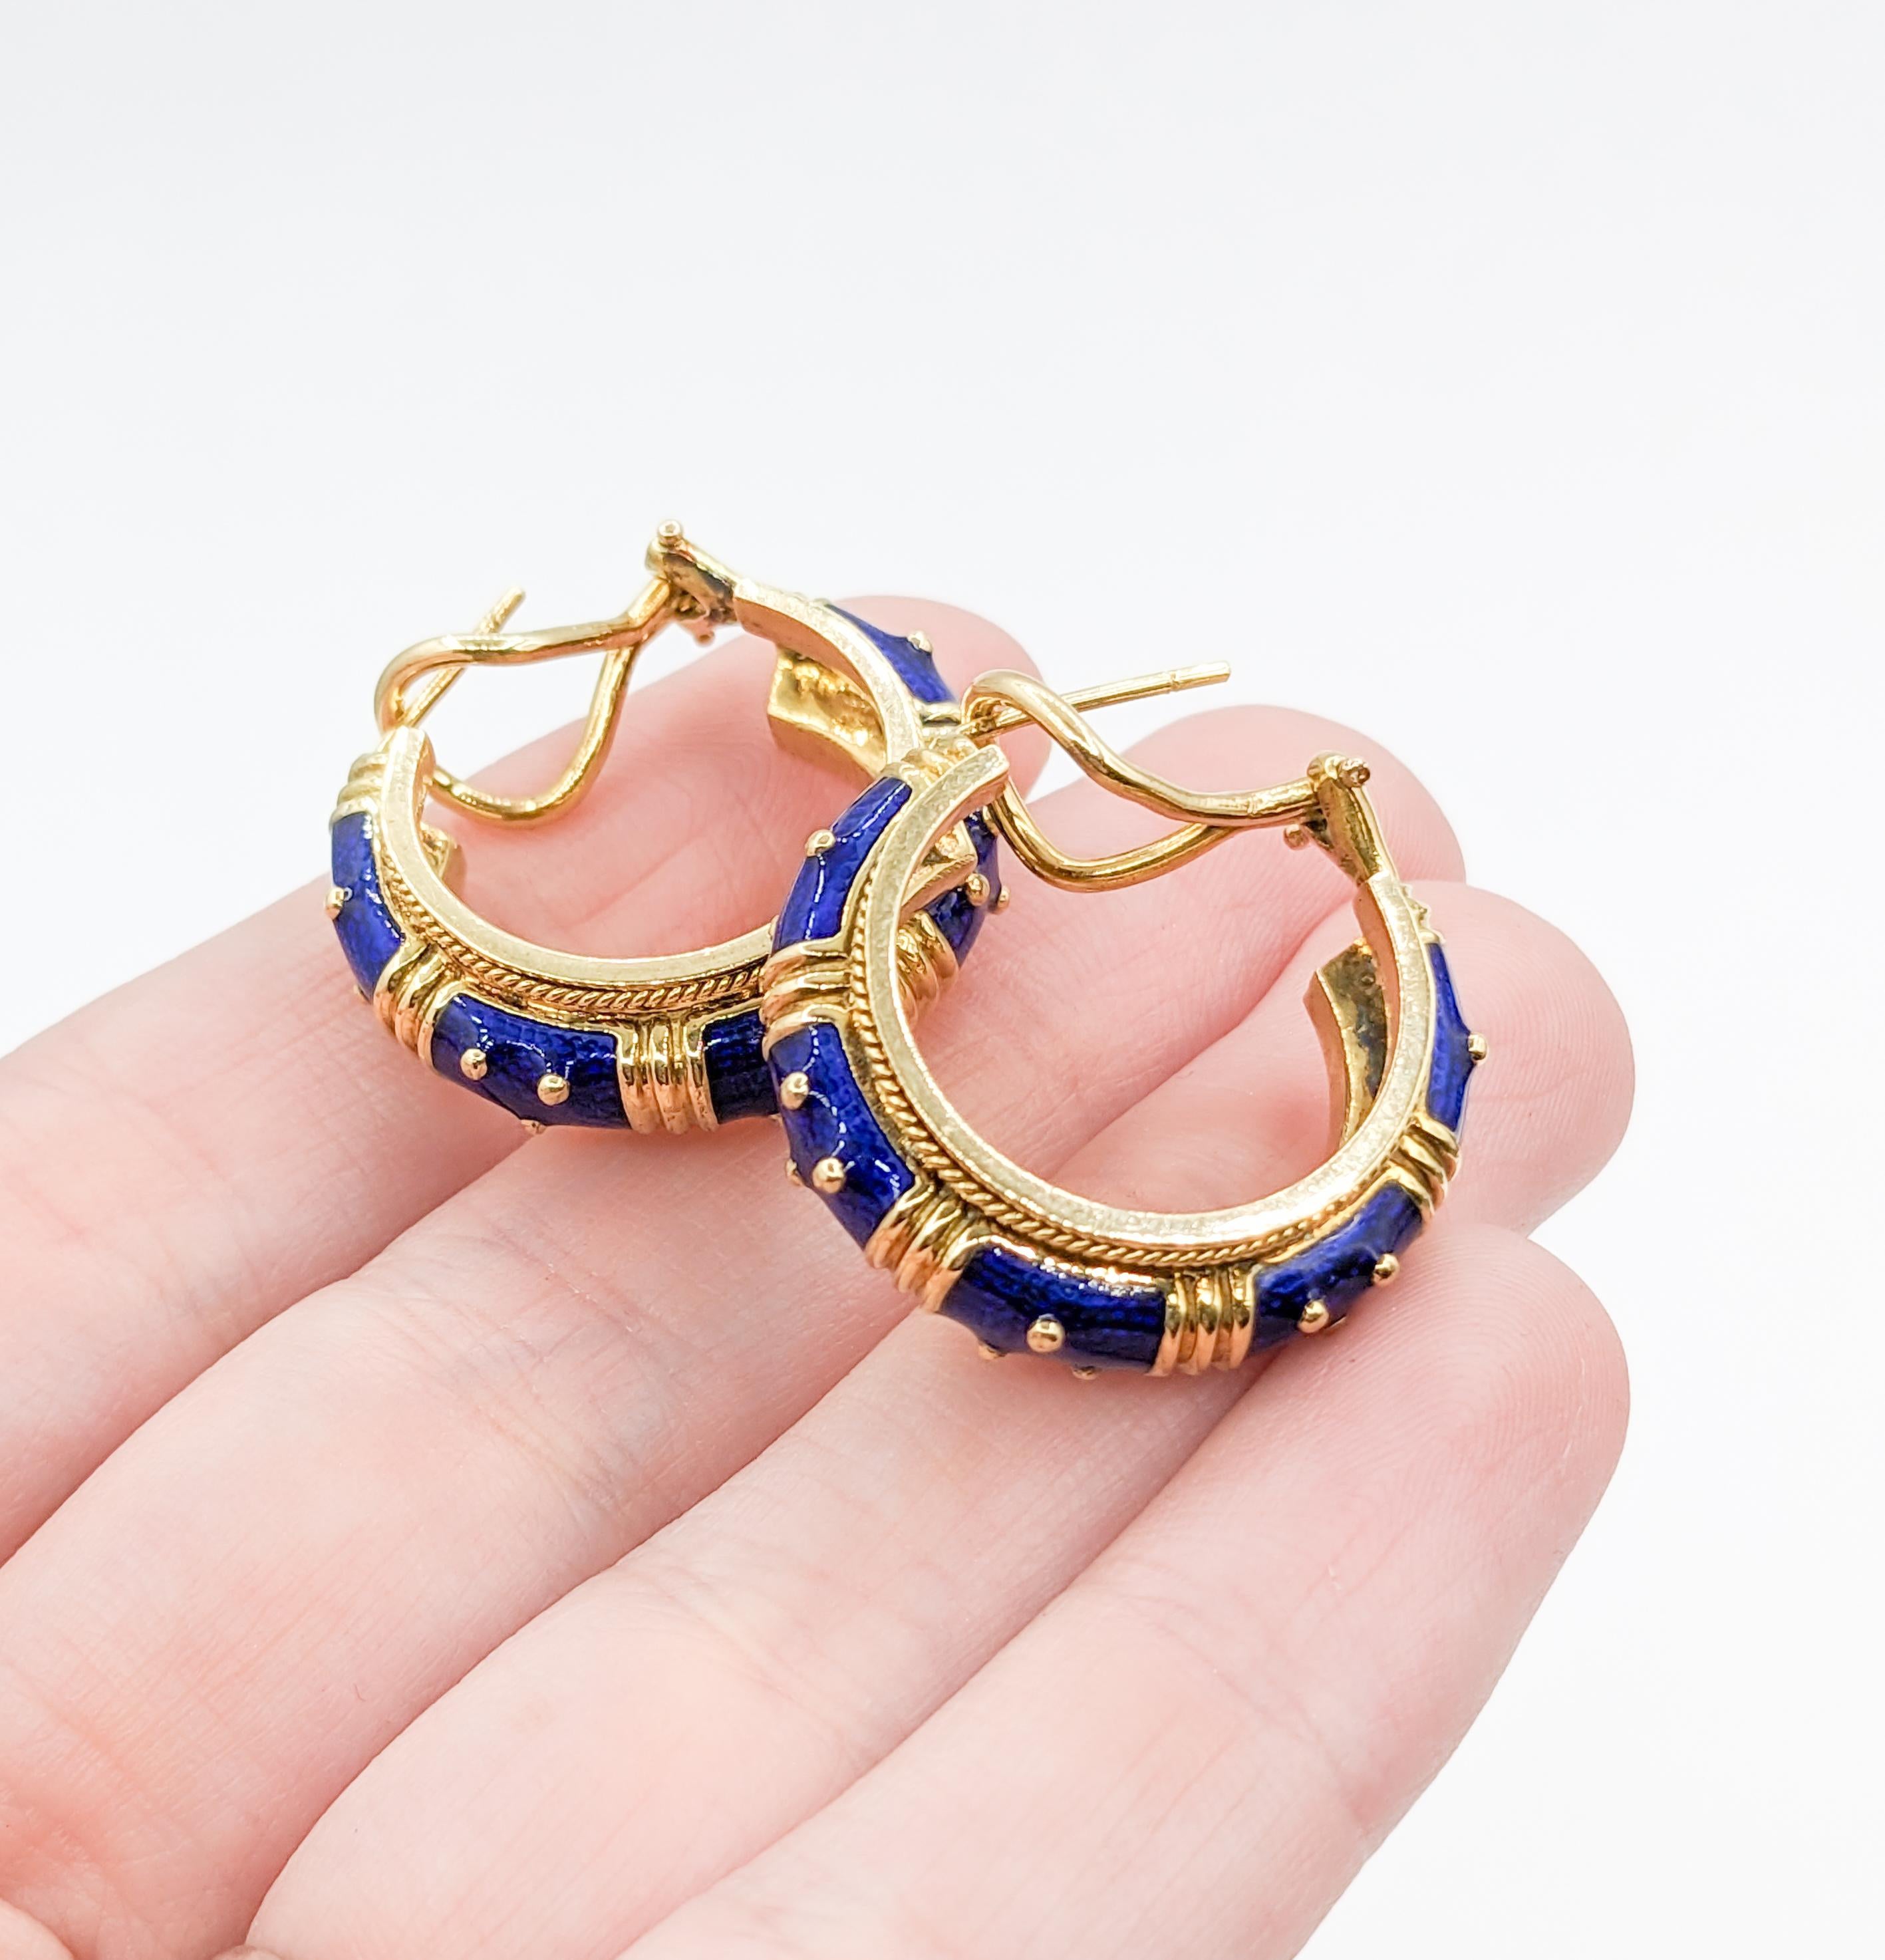 Vibrant Blue Enamel Hidalgo Hoop Omega Earrings

Elevate your style with these Hidalgo hoop earrings! These enchanting earrings, intricately crafted in 18k yellow gold with 14k omega backs, showcase mesmerizing blue enamel with a signature Hidalgo